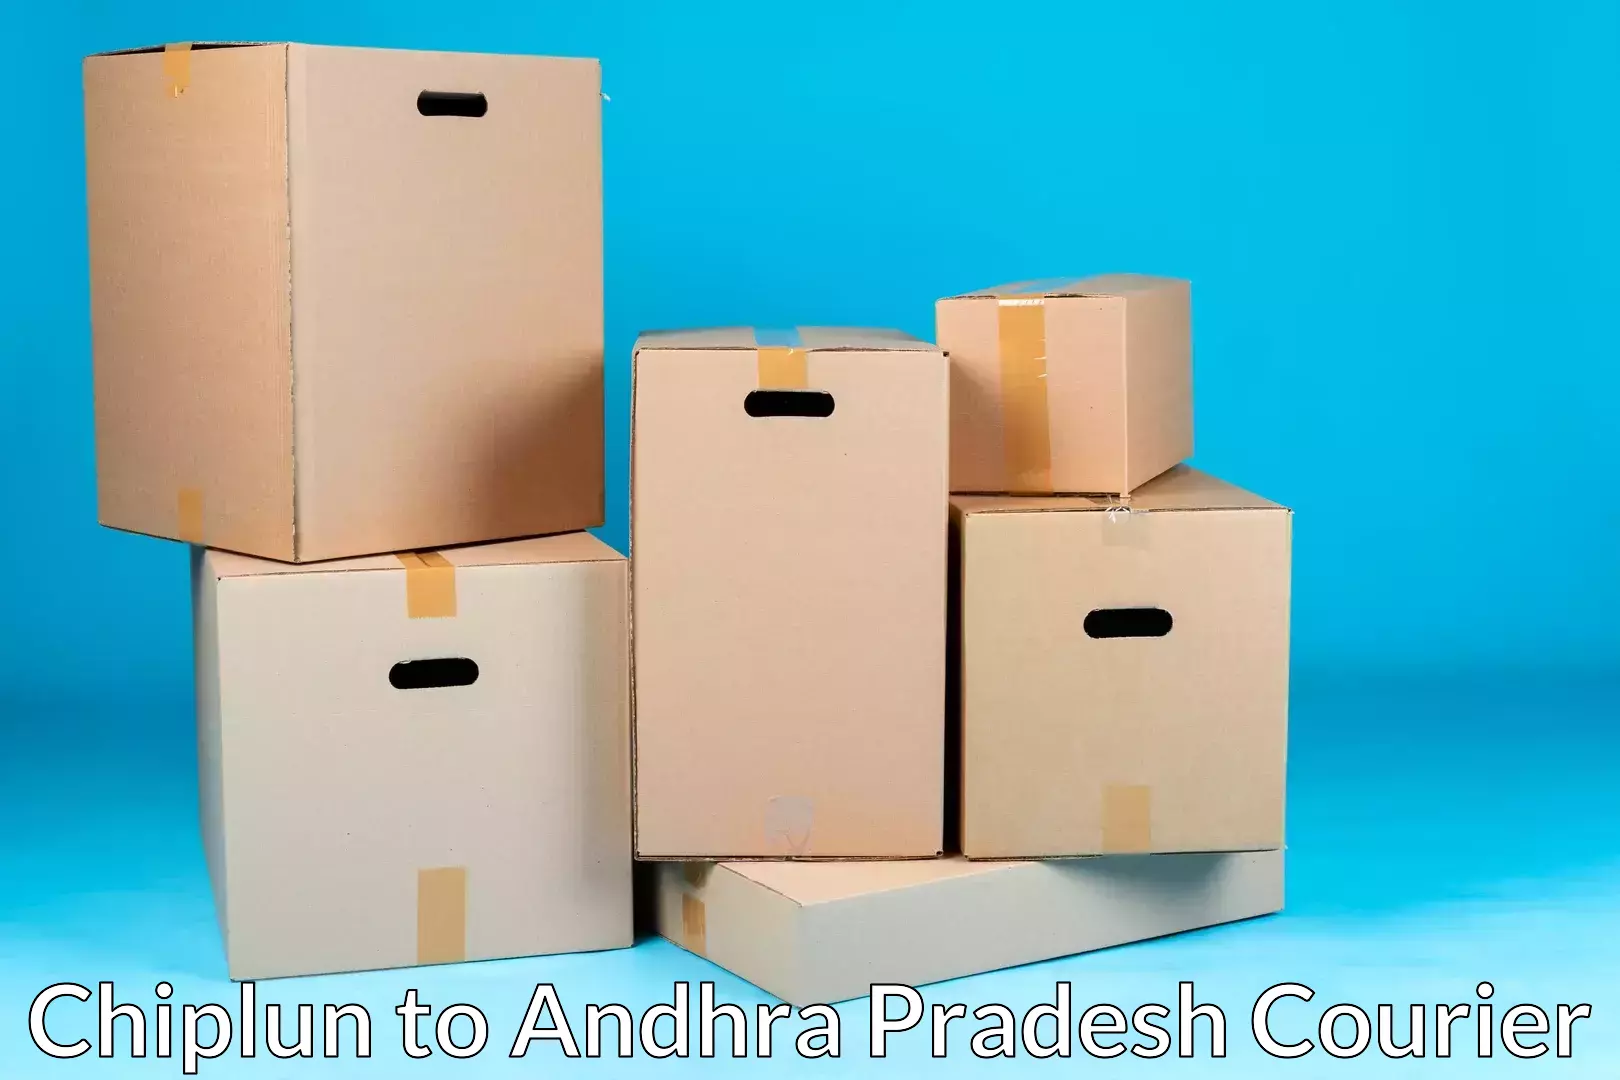 Quality moving and storage in Chiplun to Andhra Pradesh